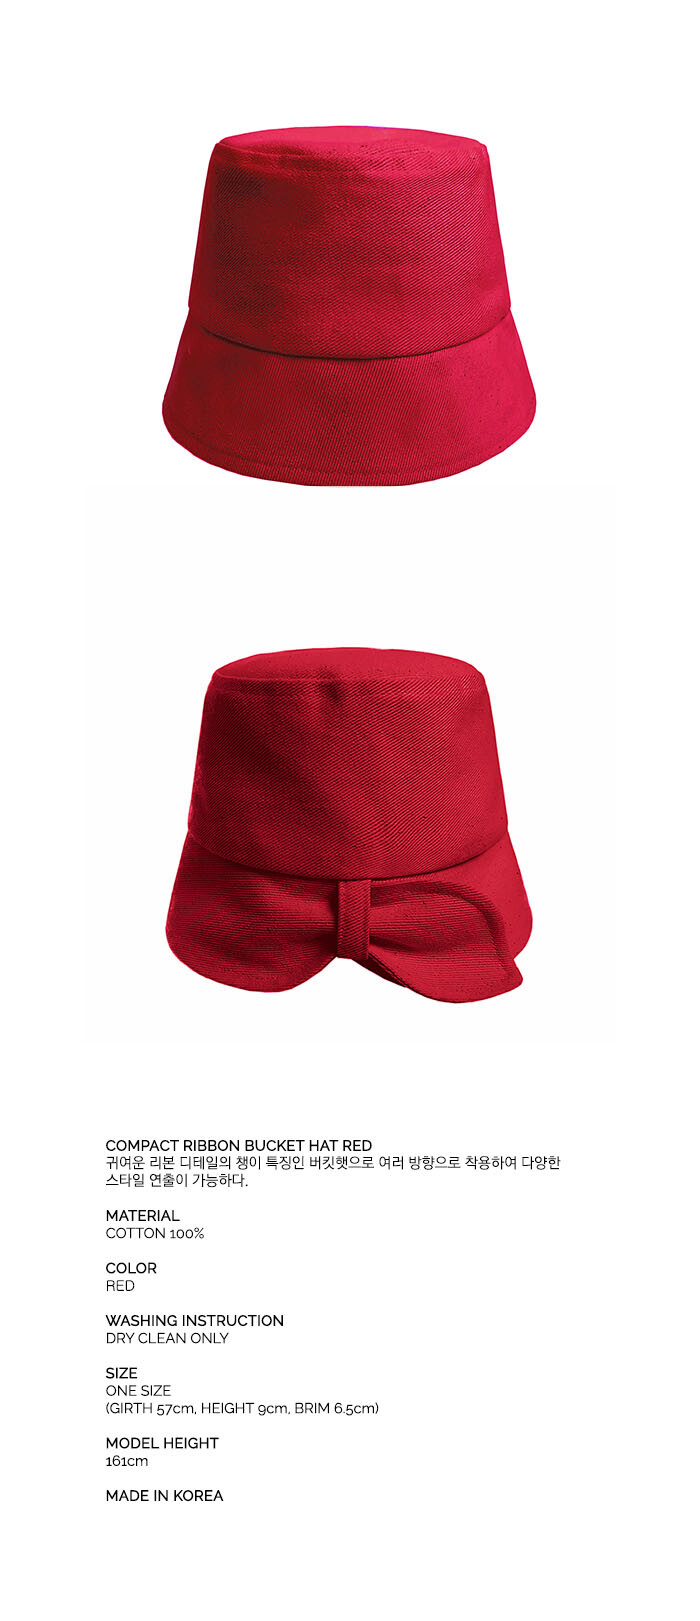 COMPACT RIBBON BUCKET HAT RED